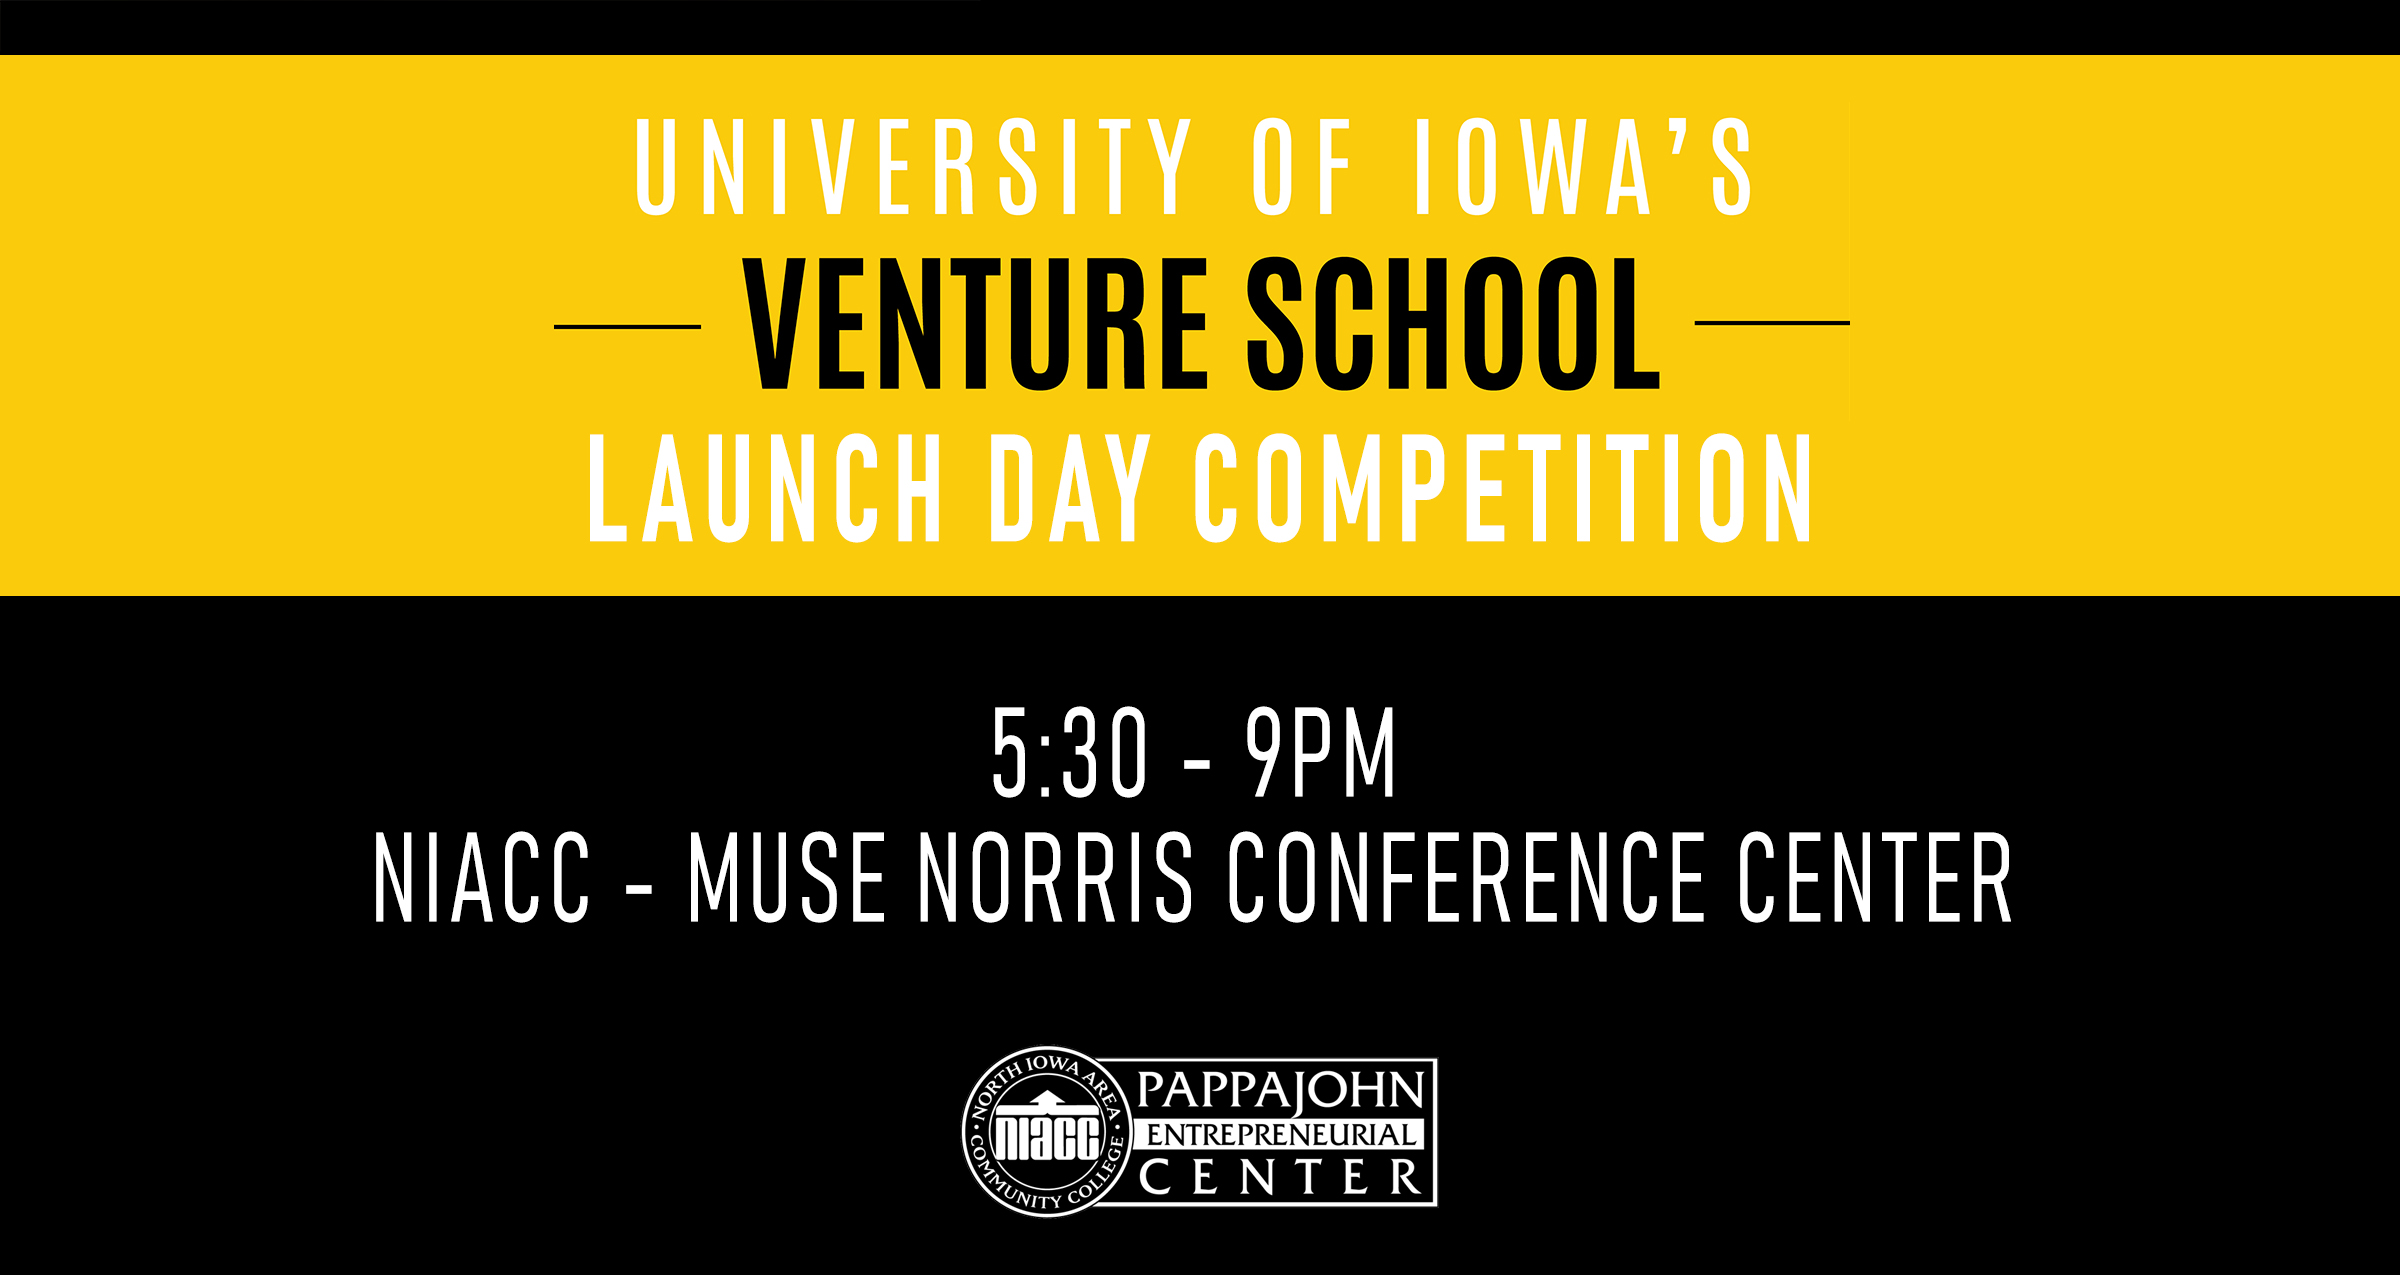 Venture School Launch Day Competition NIACC Pappajohn Entrepreneurial